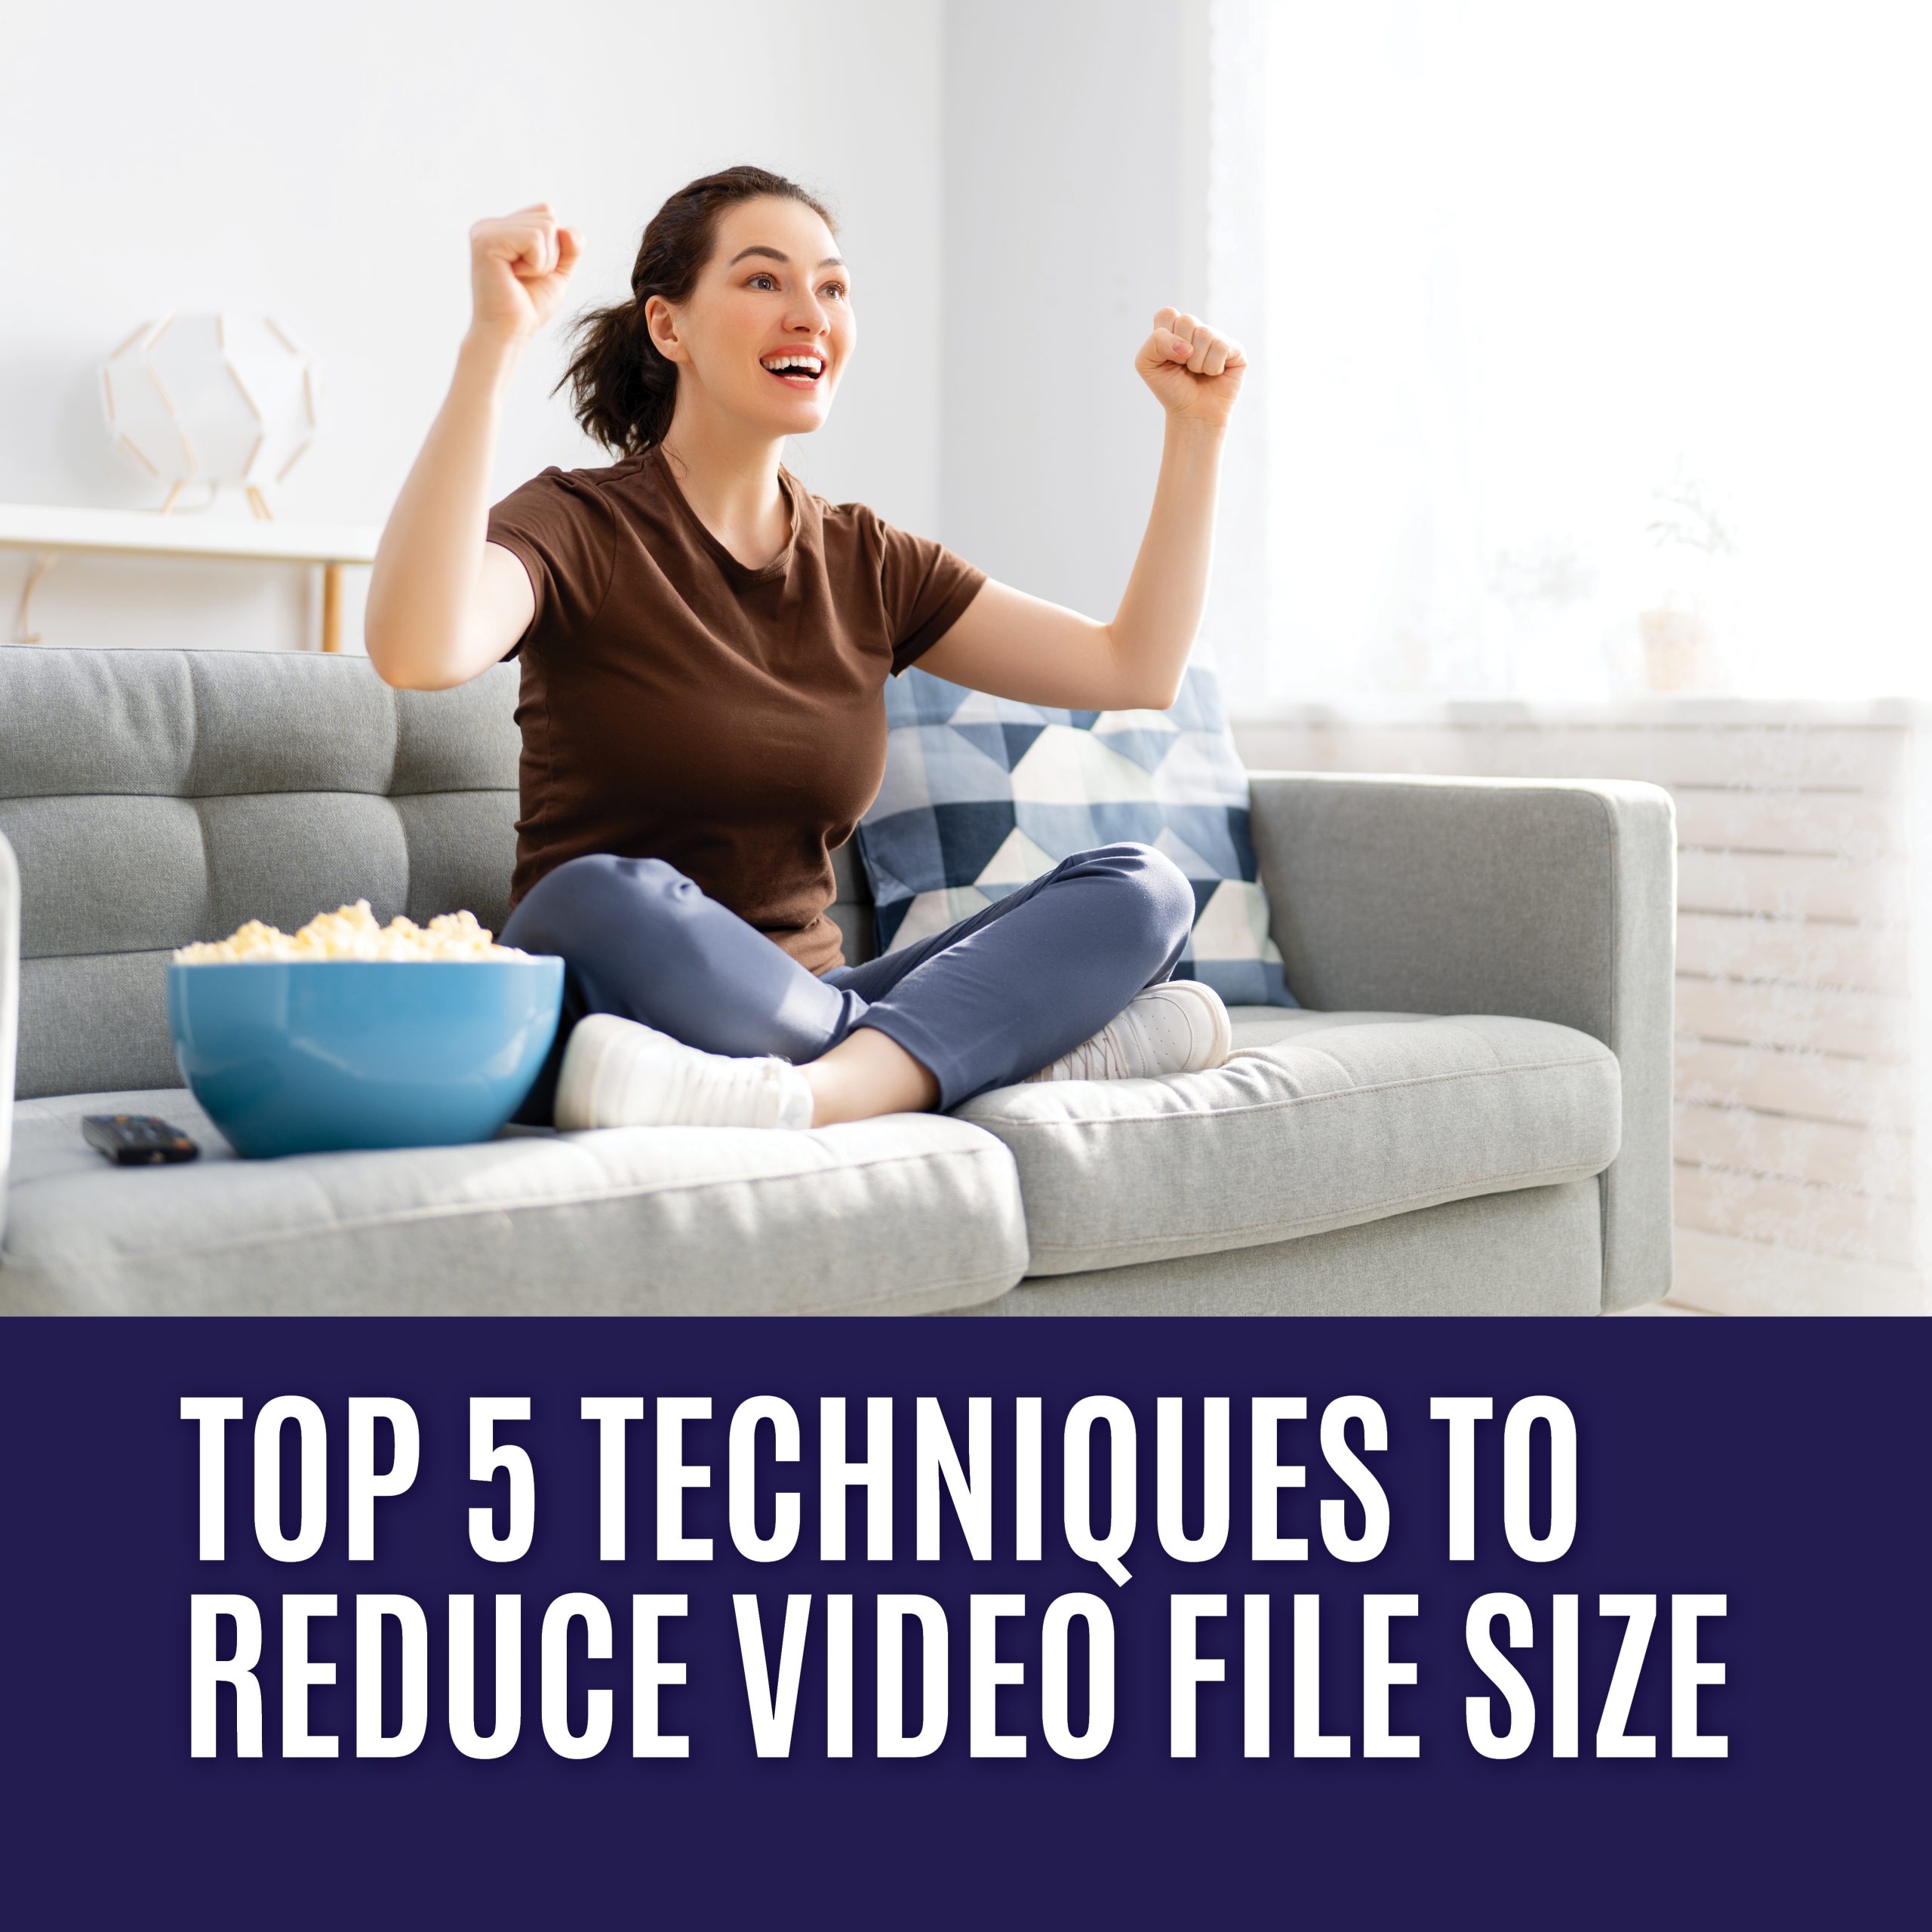 op 5 Techniques To Reduce Video File Size